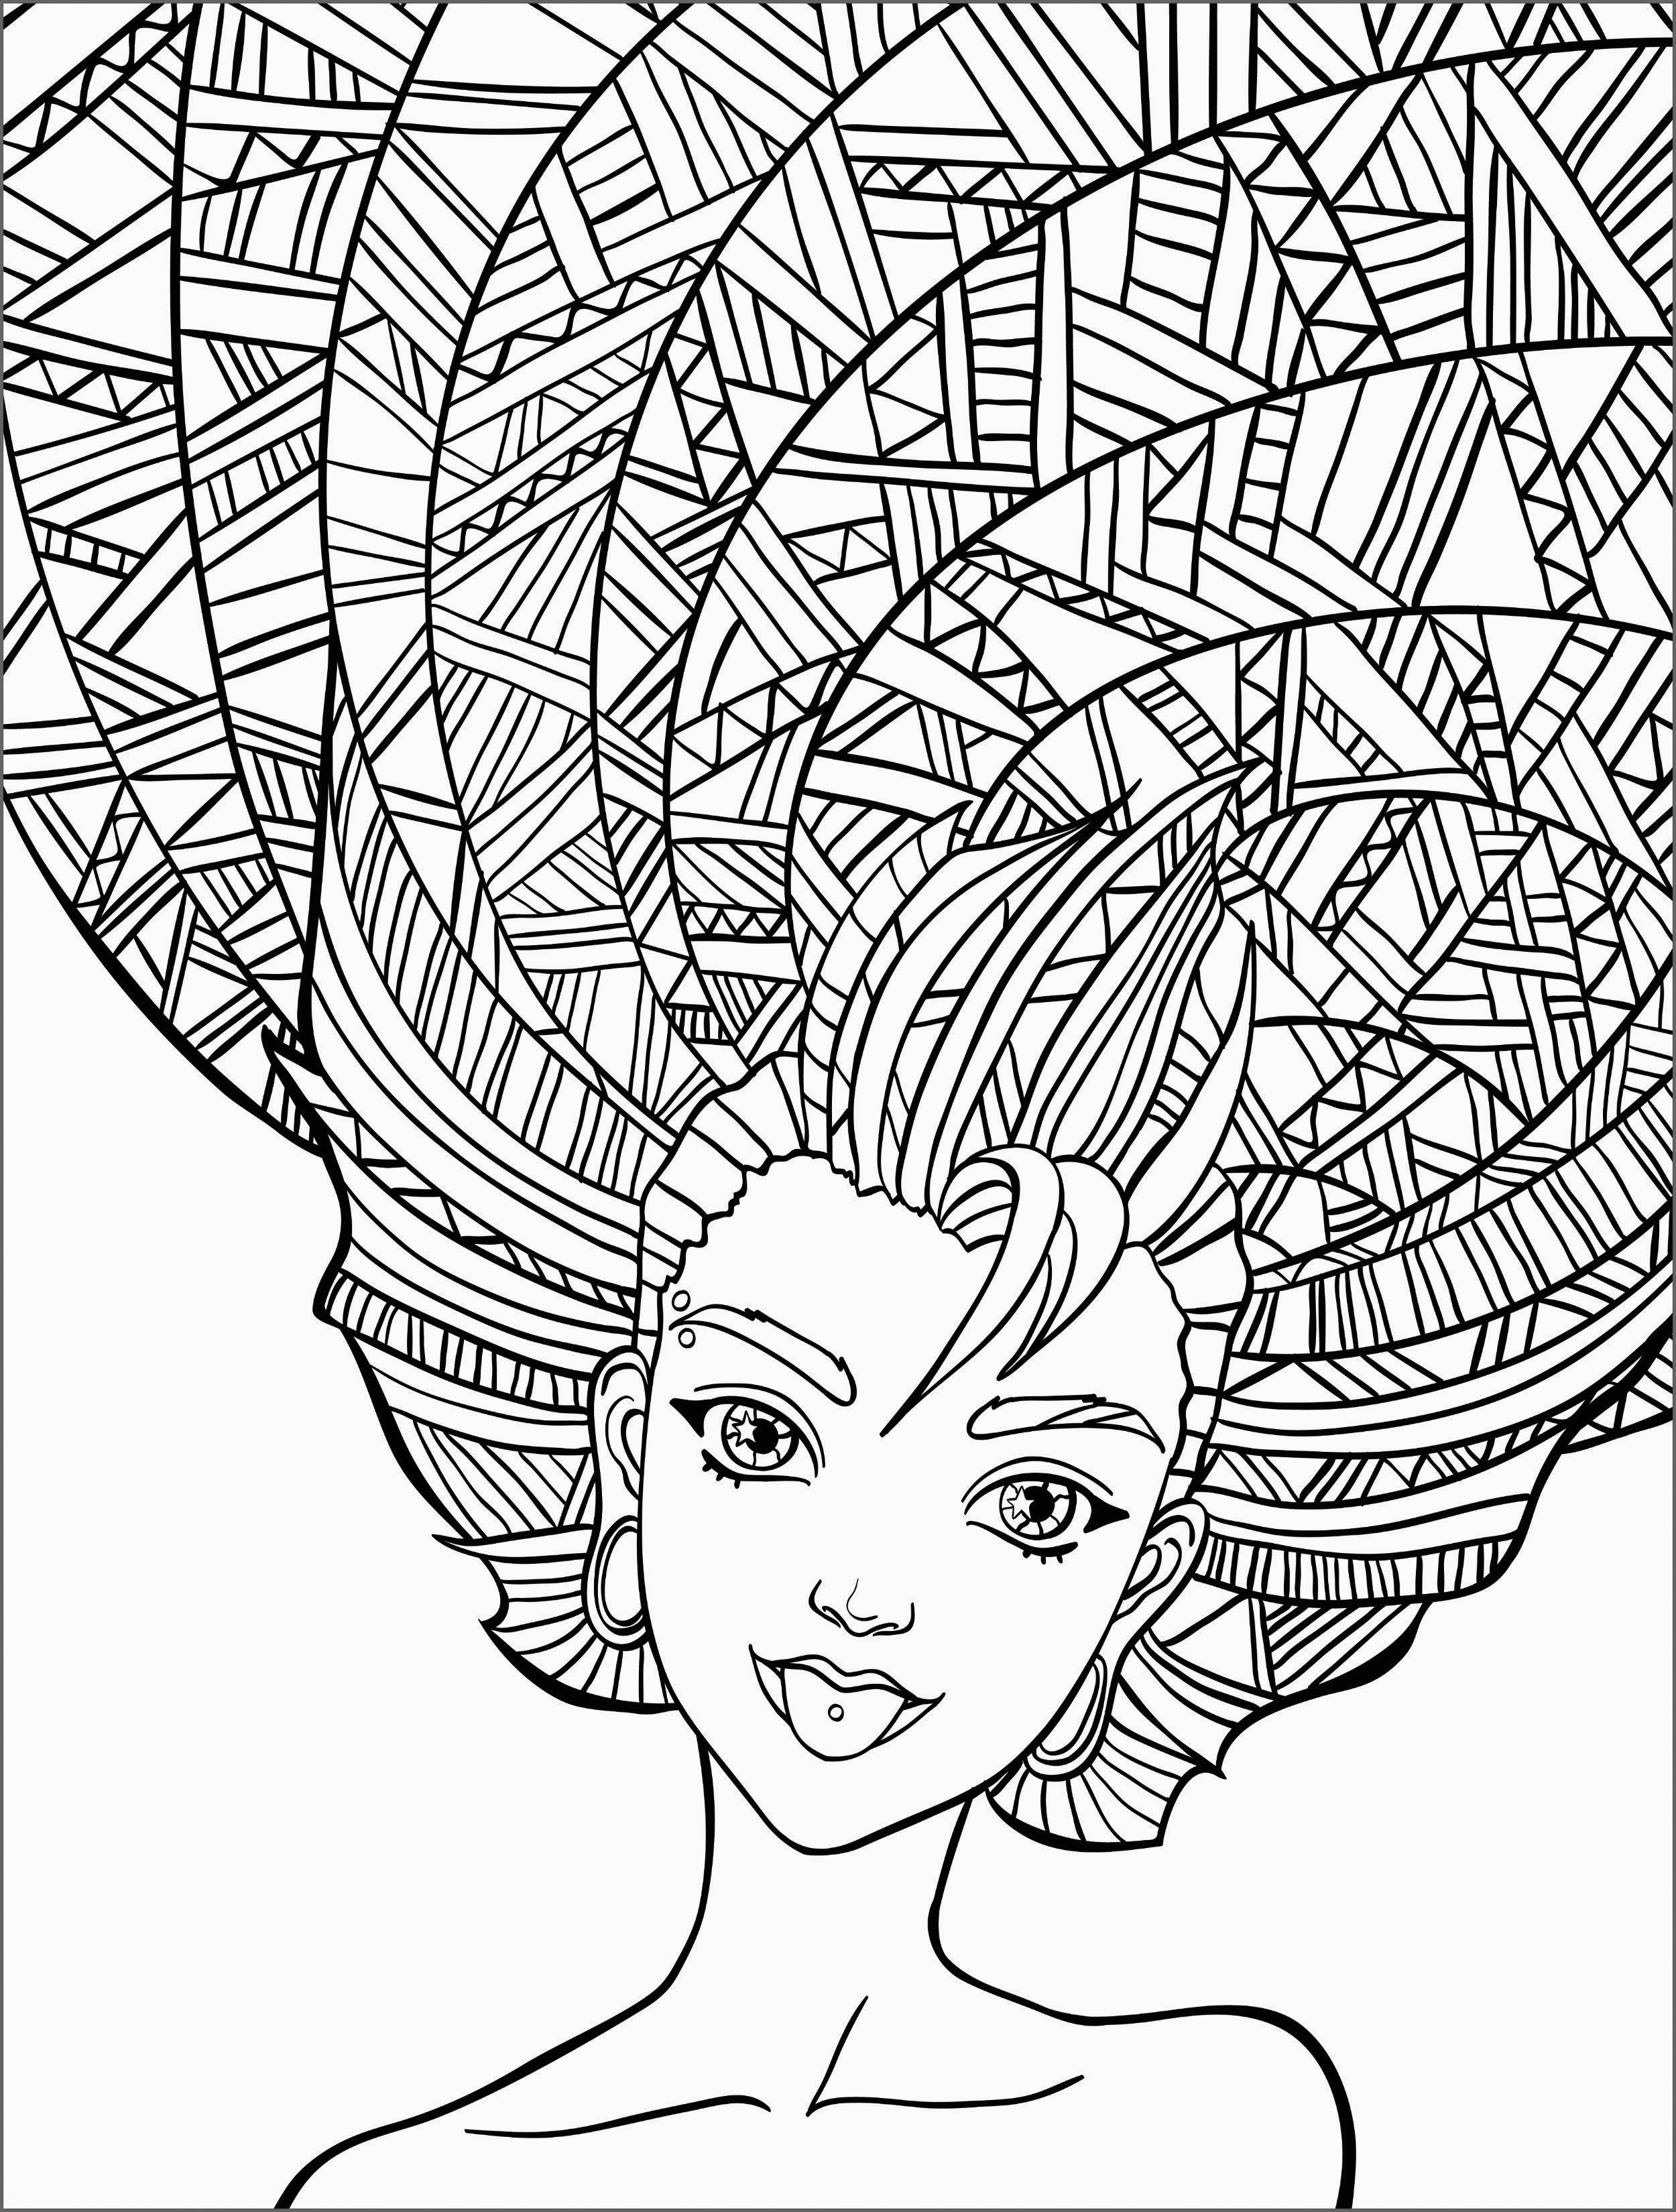 coloring-pages-for-adults-best-coloring-pages-for-kids